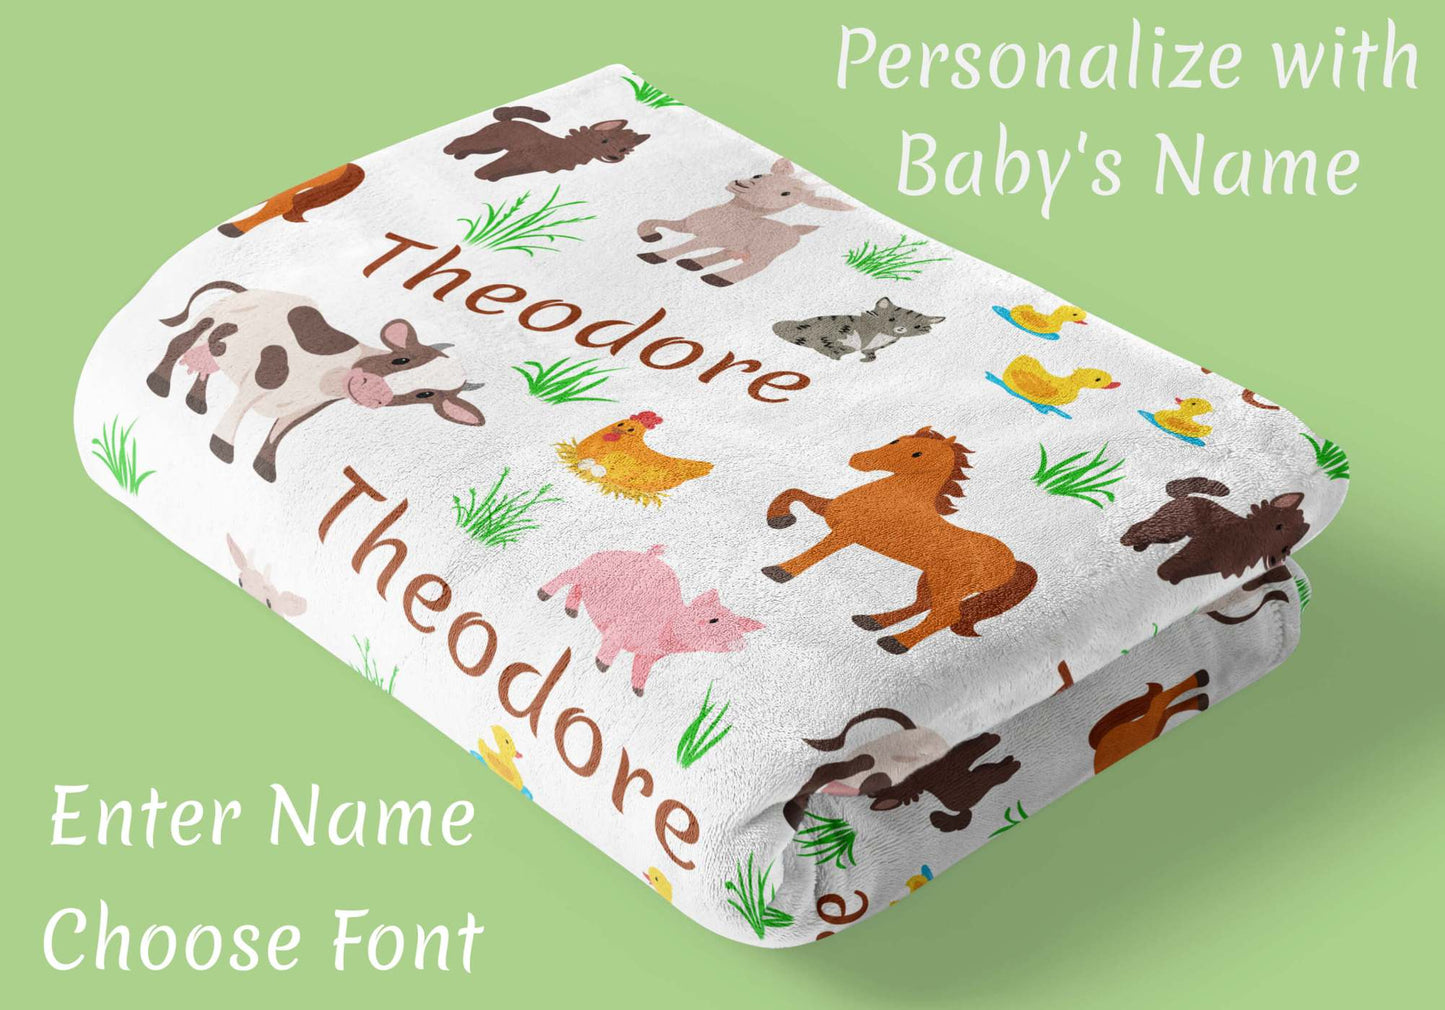 Personalized Baby Blankets for Boys and Girls with Name and Farm Animals: Cow, Horse, Pig, Goat